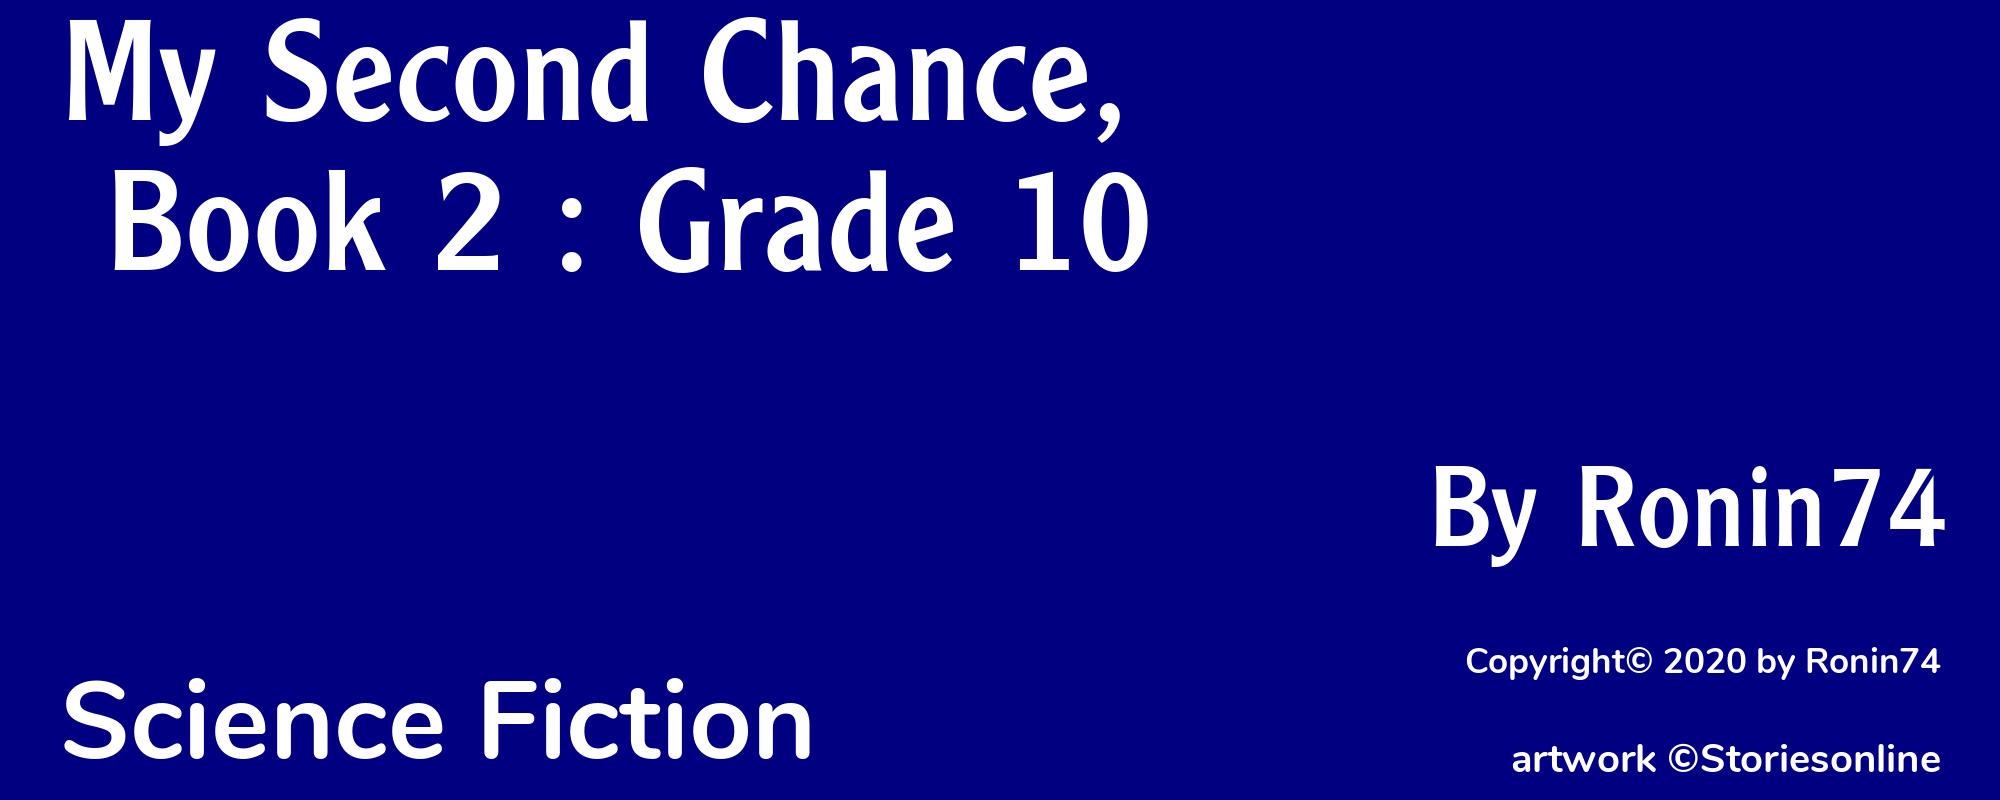 My Second Chance, Book 2 : Grade 10 - Cover